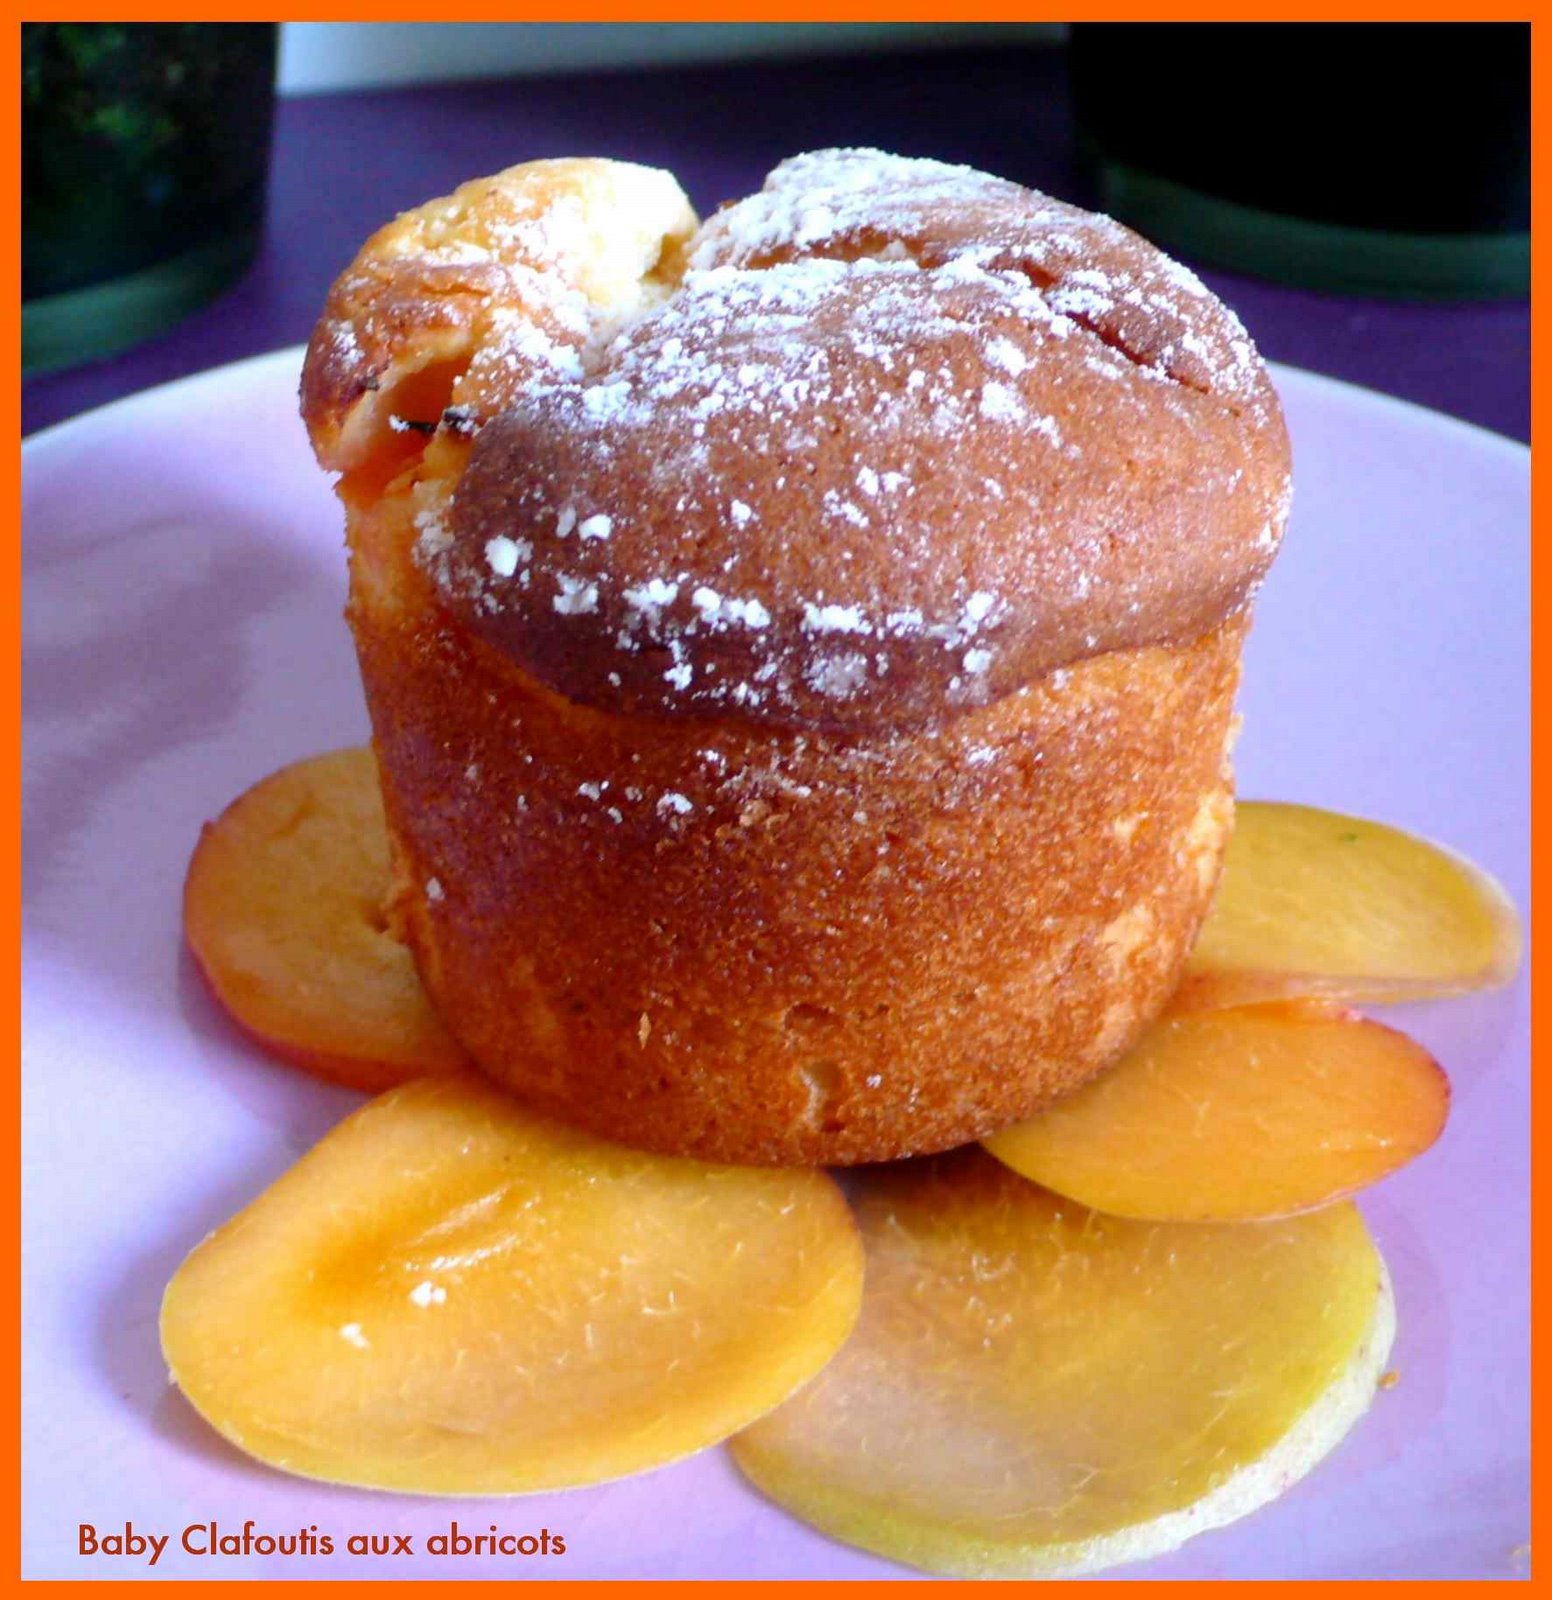 [baby+clafoutis+aux+abricots+2.jpg]